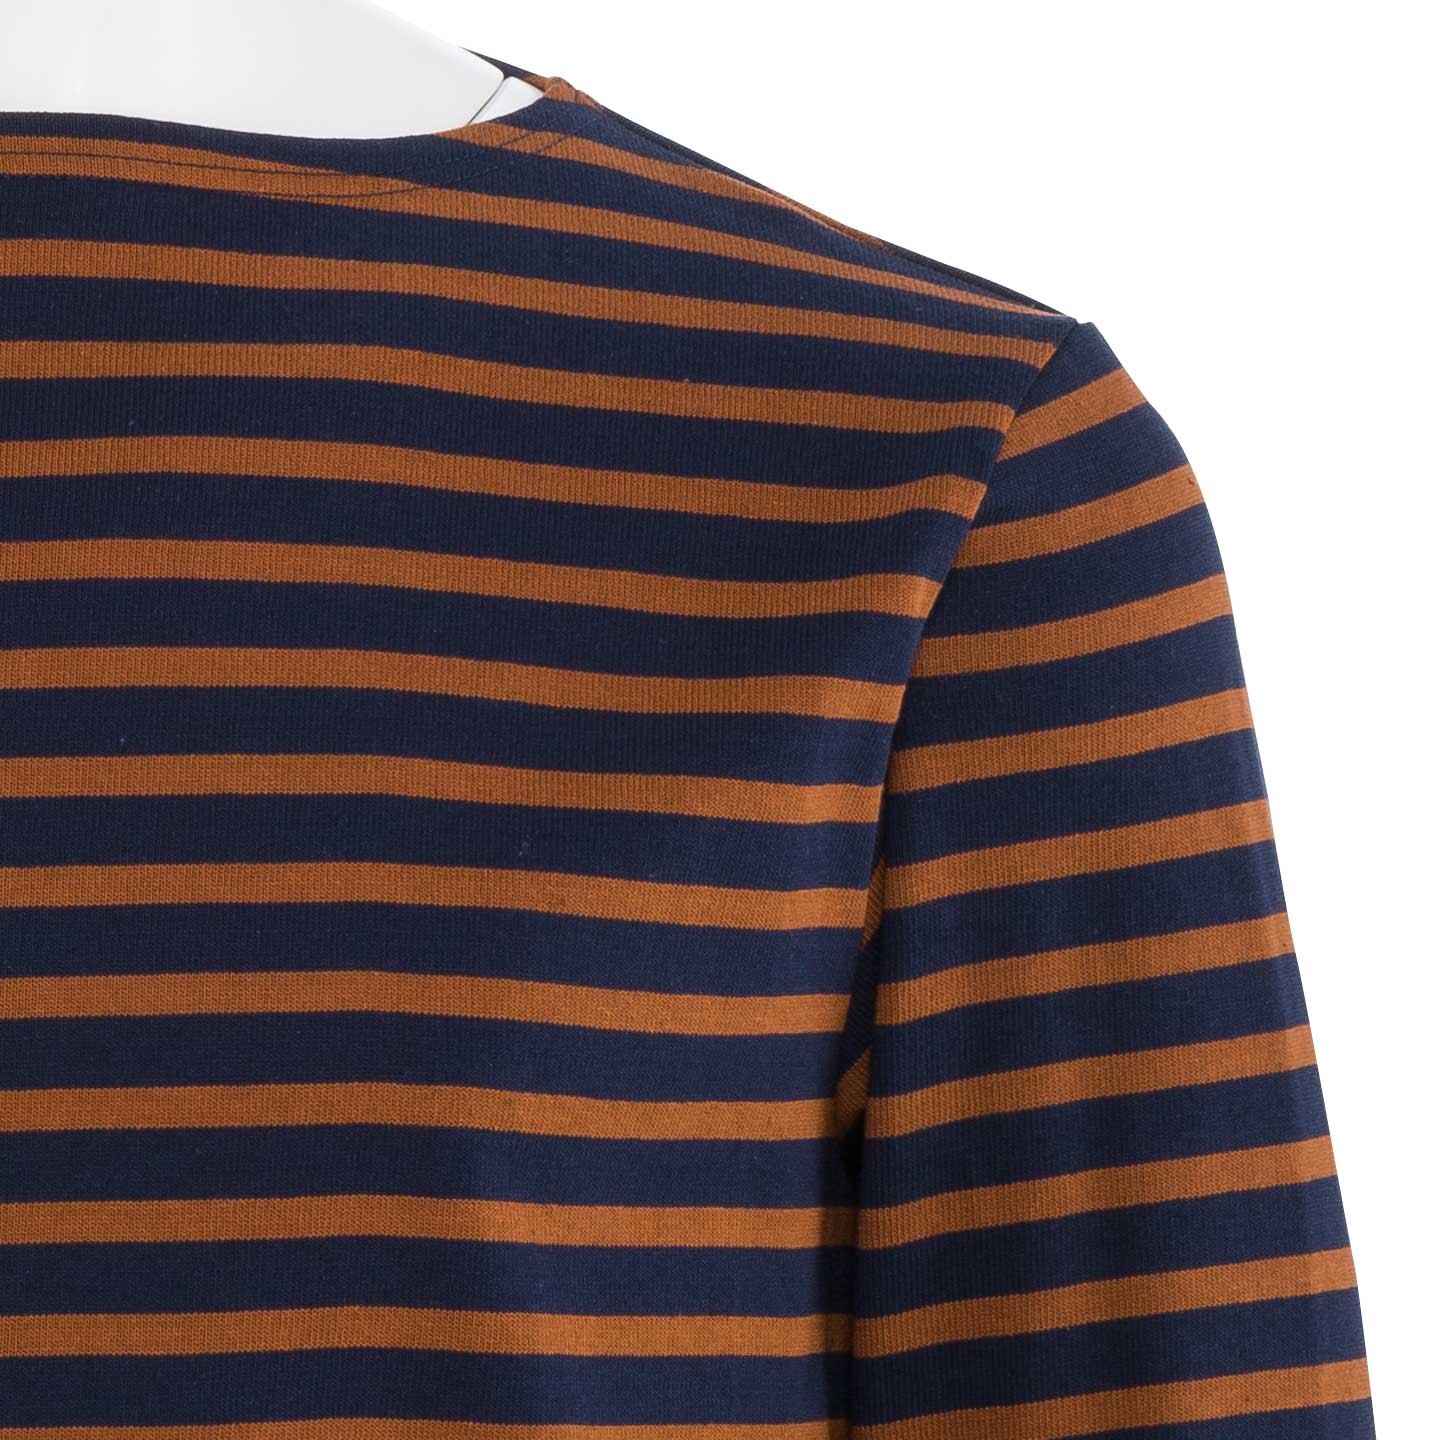 Striped shirt Navy / Hazelnut, unisex made in France Orcival